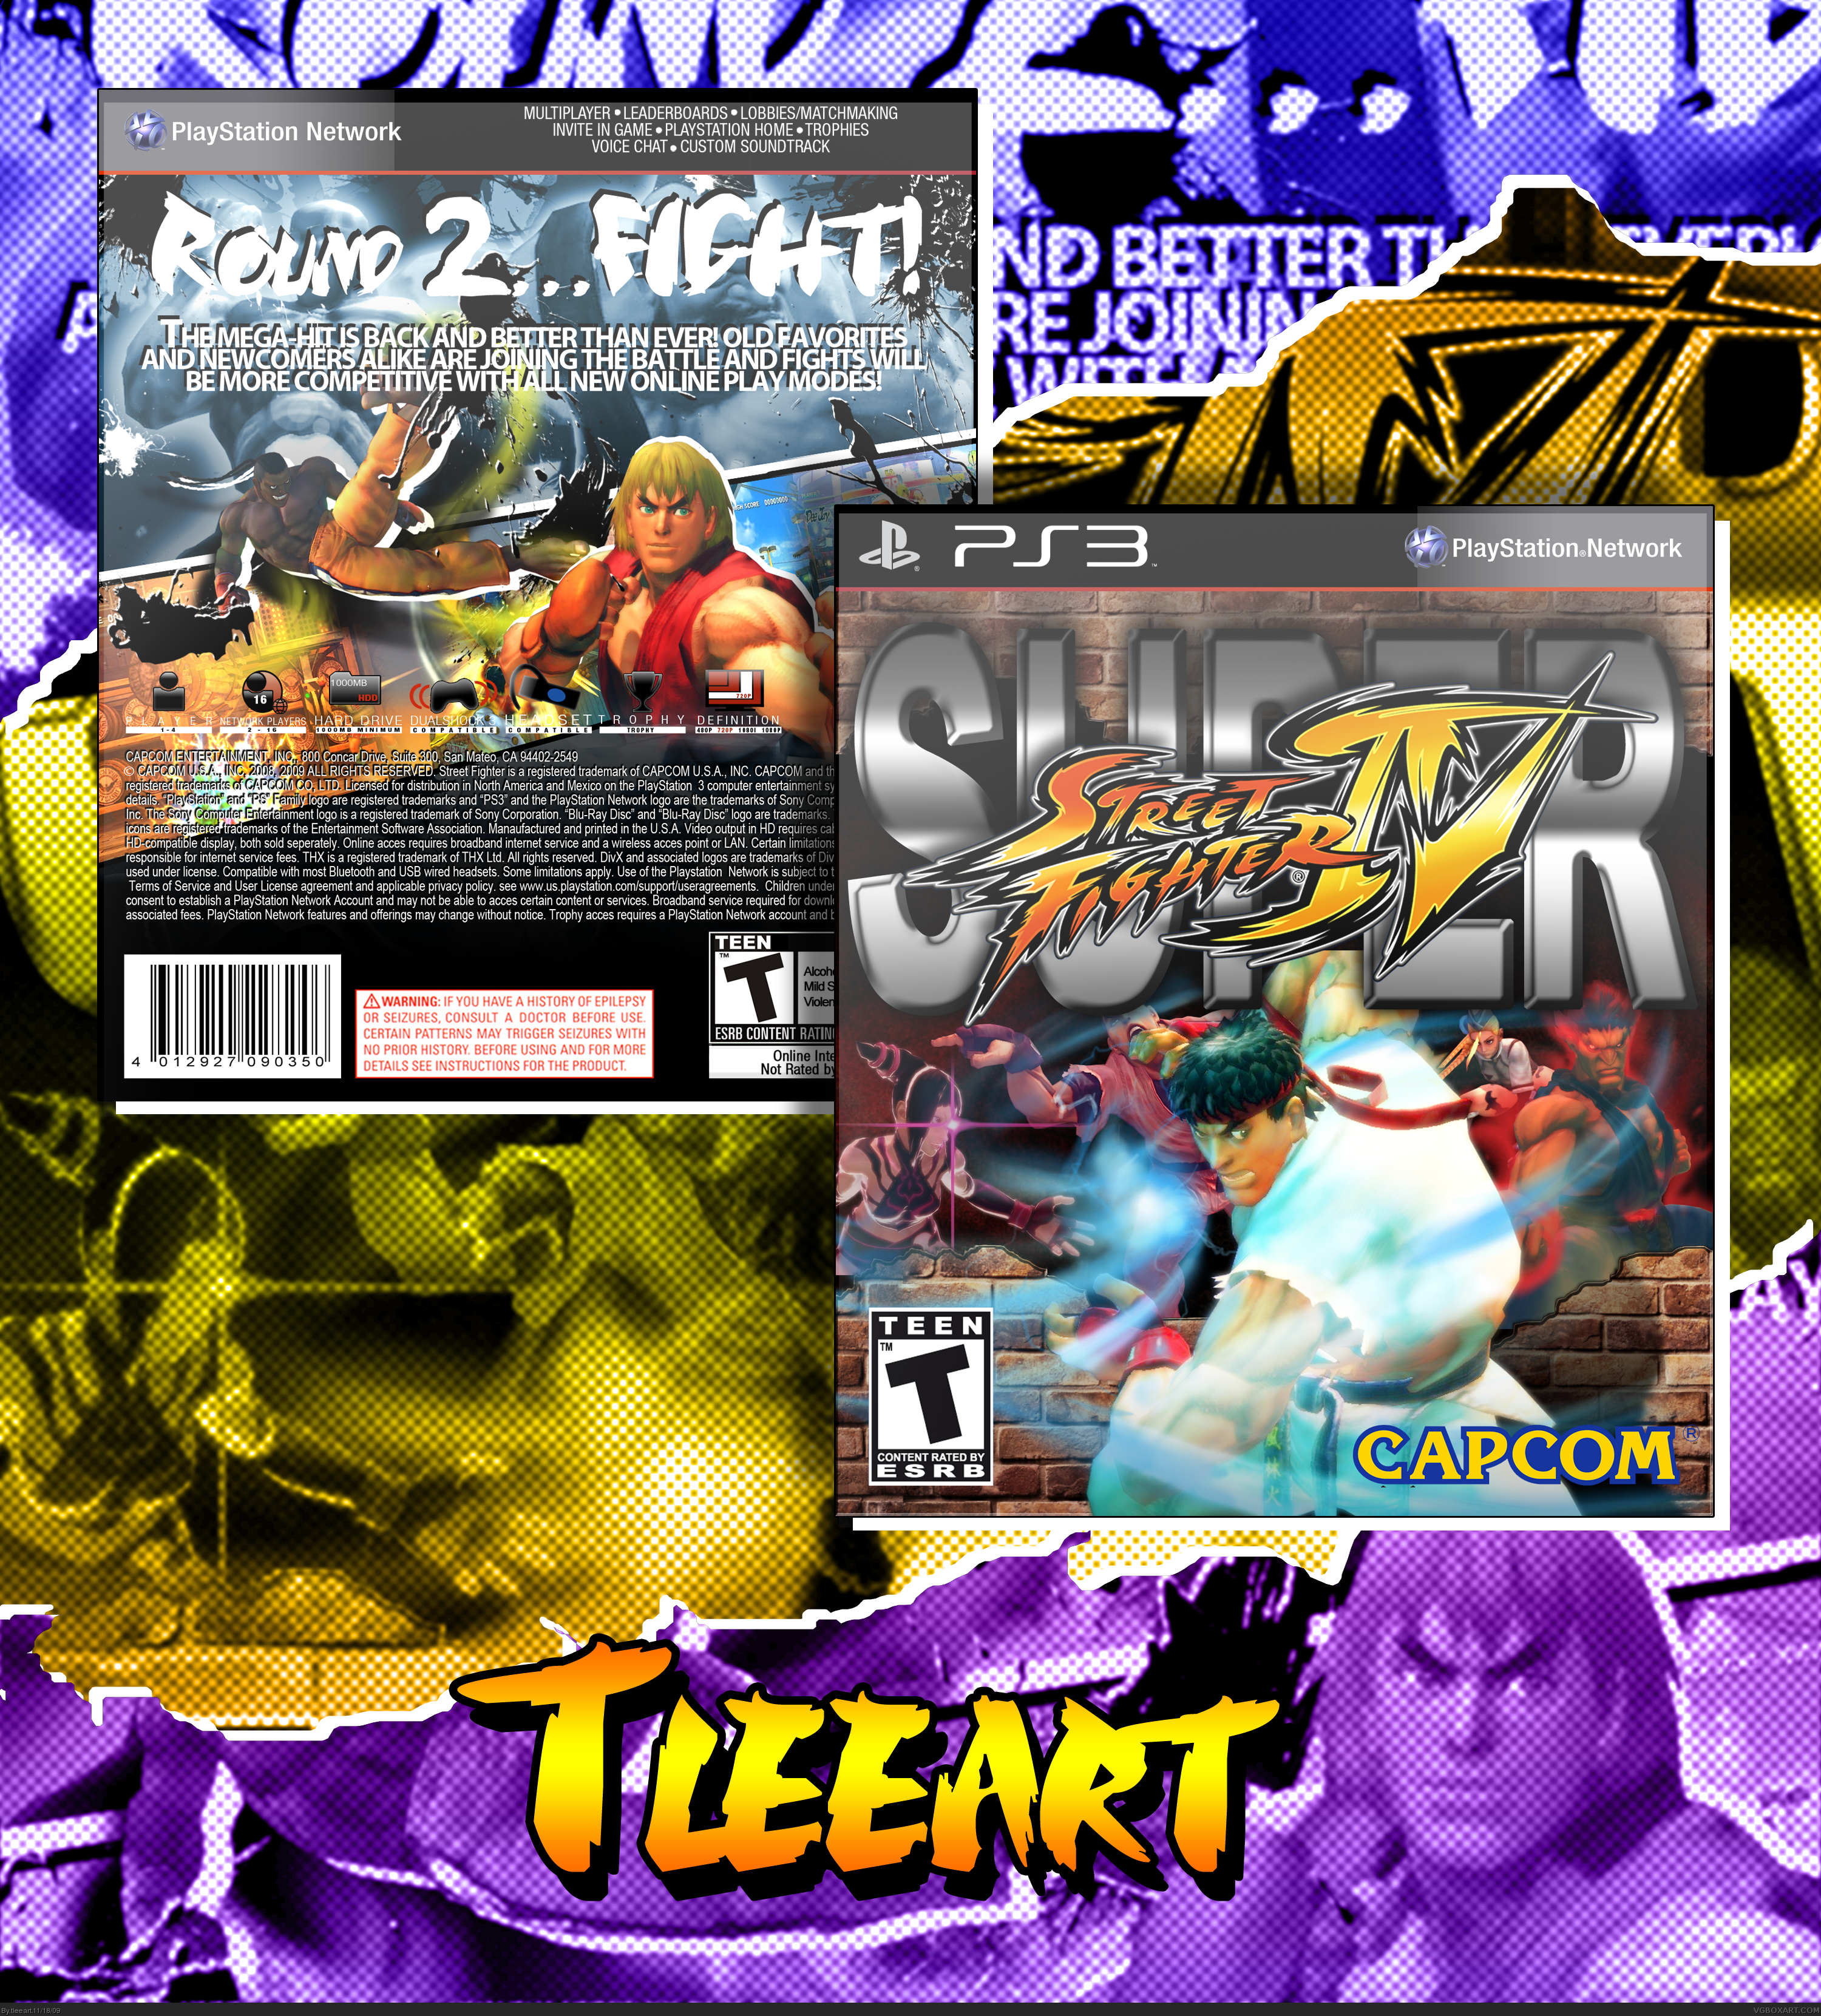 Super Street Fighter IV box cover